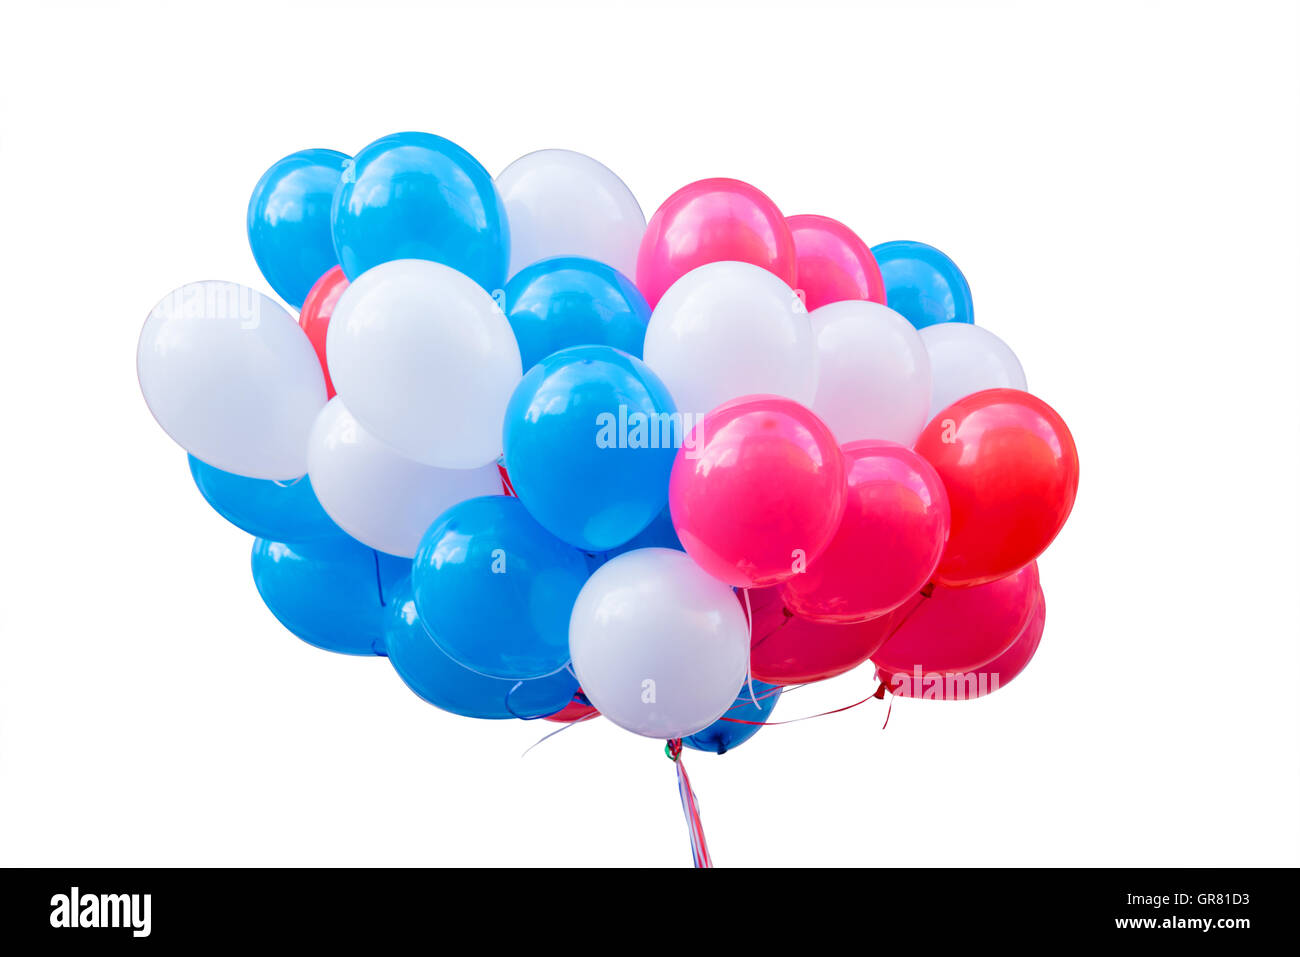 Bleu Blanc et rouge ballons isolated on white Banque D'Images